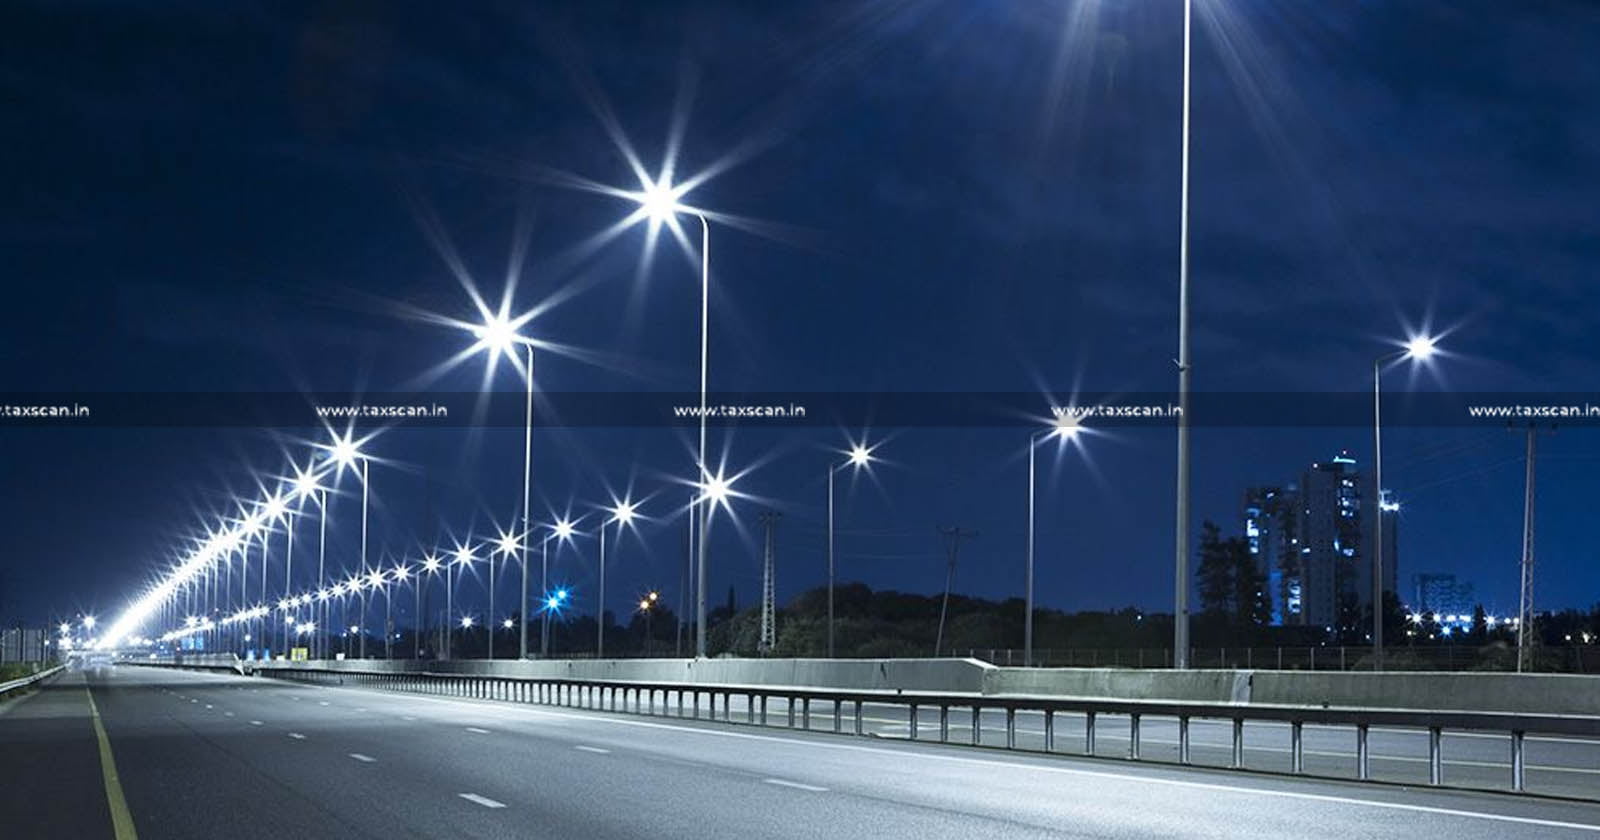 Supply - Services of Highway Lighting System - Highway Lighting System - Installation Services - ineligible - GST - AAR - Taxscan